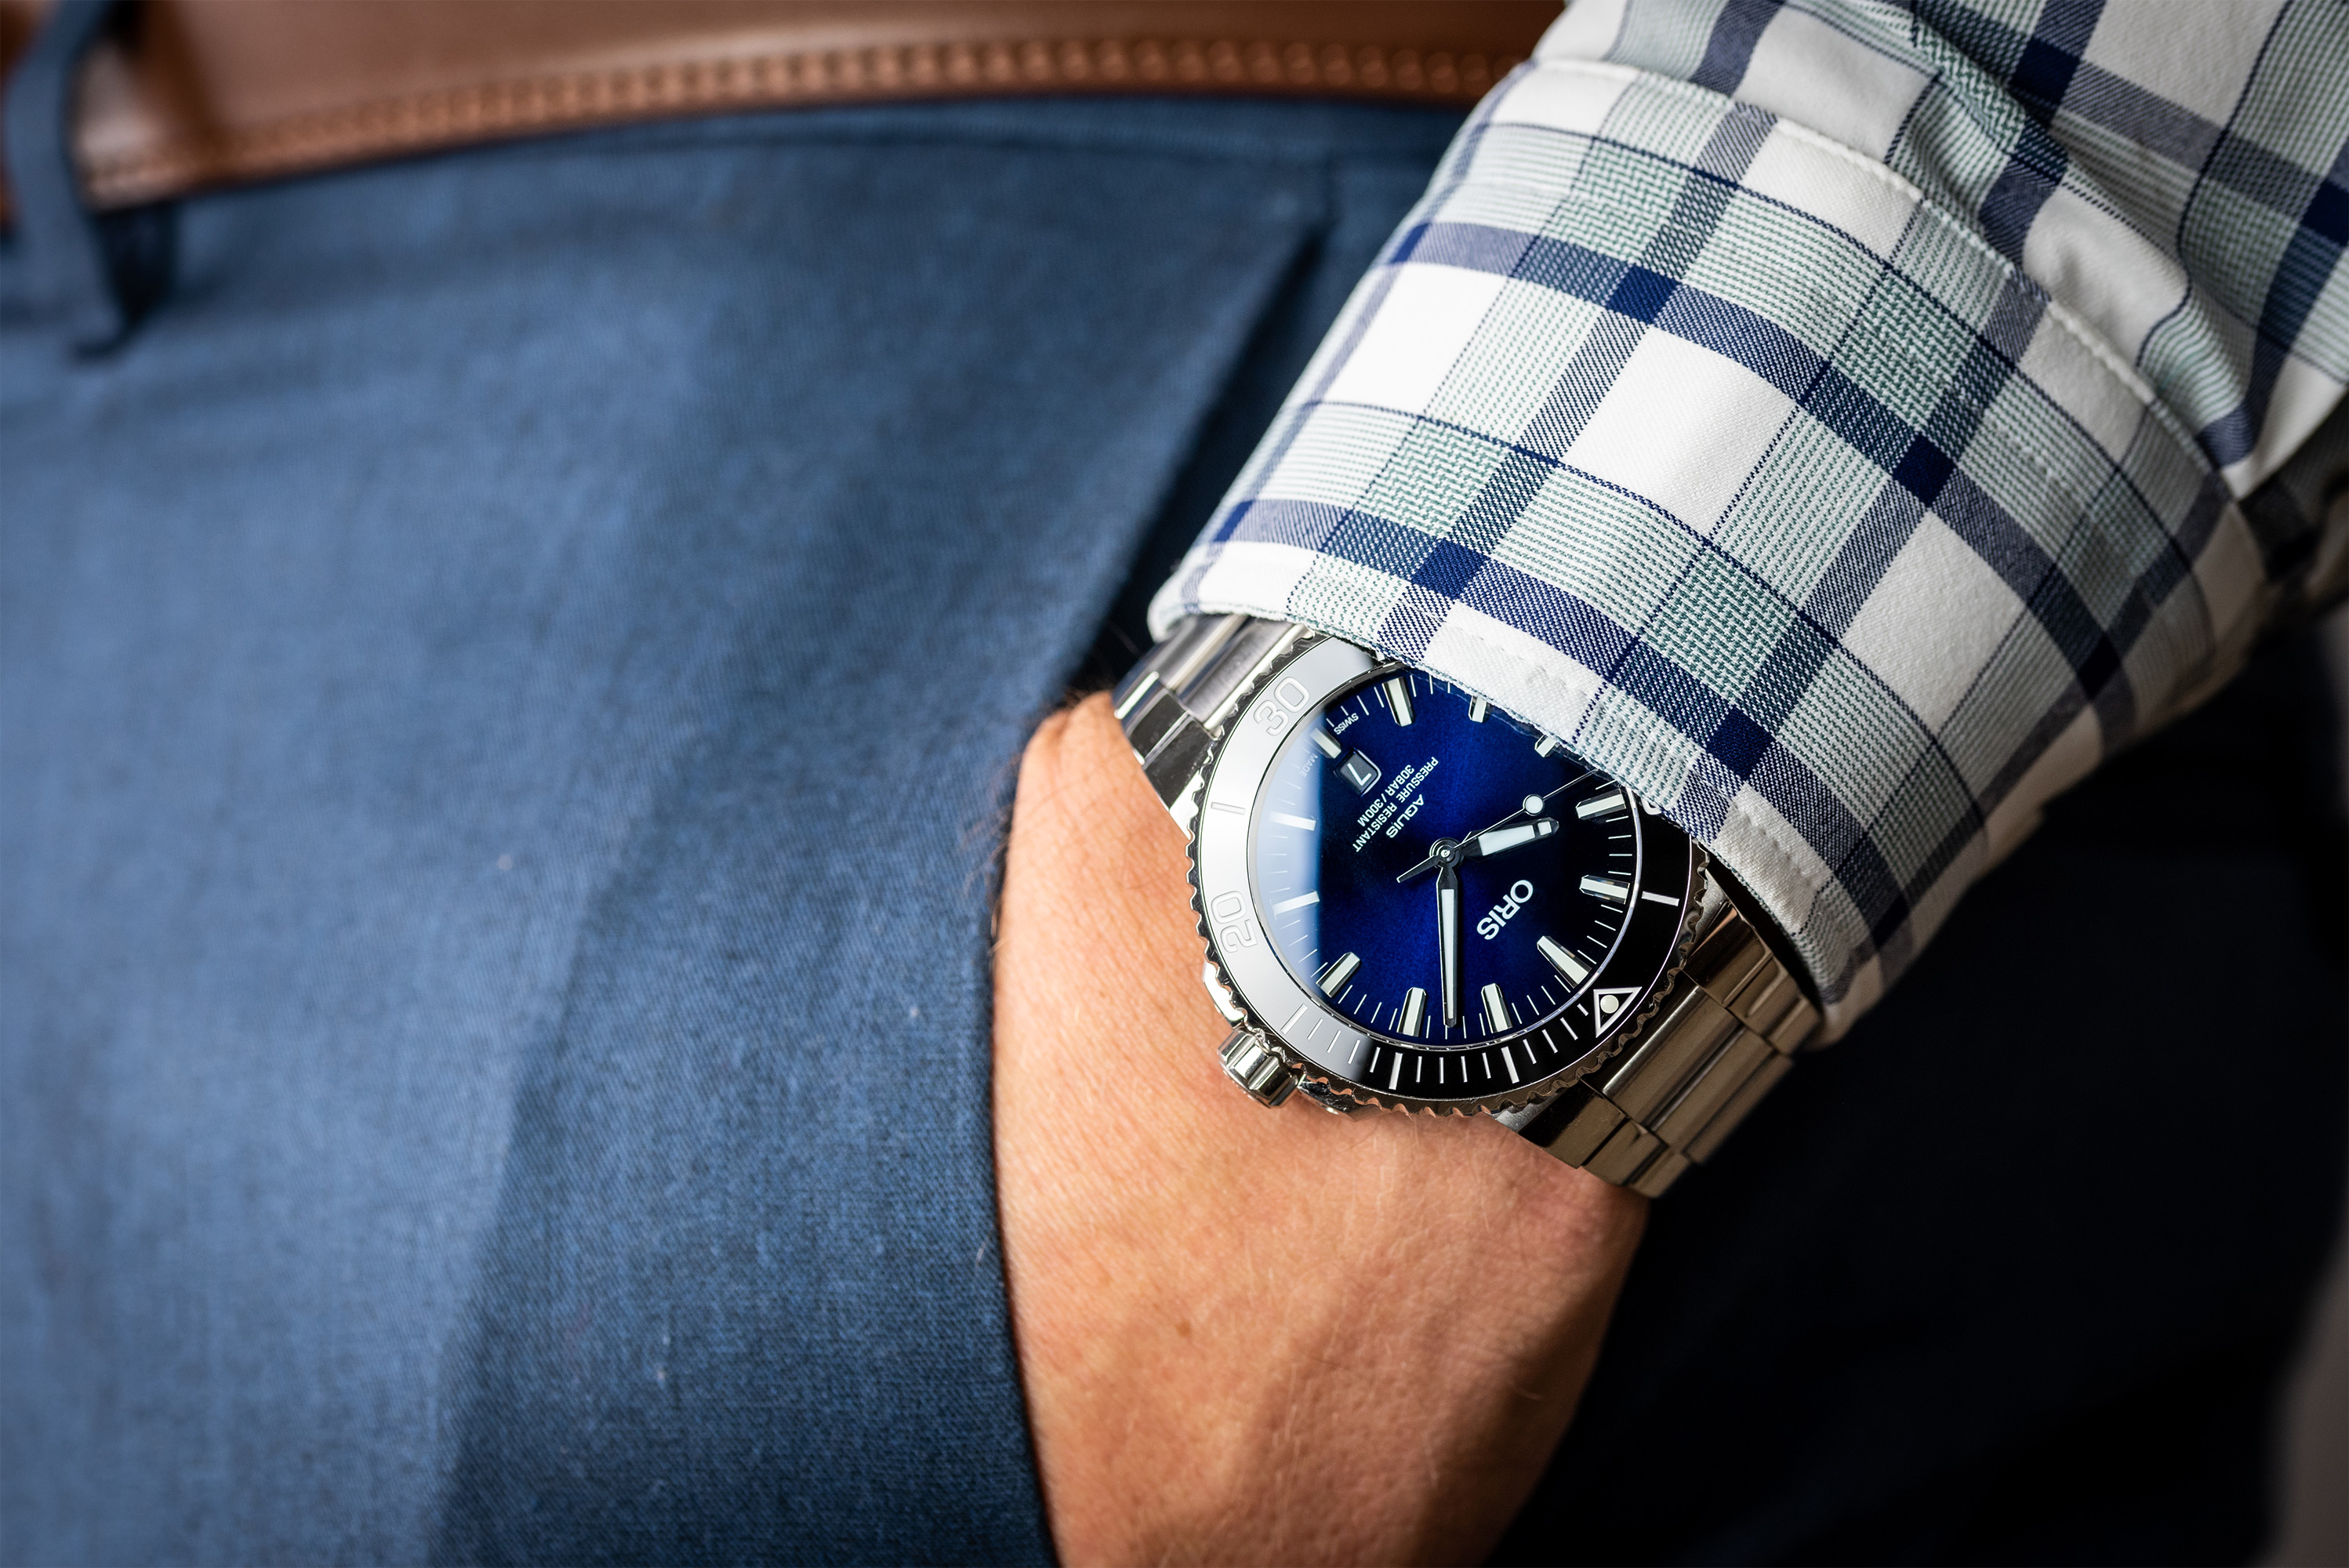 A pocket shot of the Oris Aquis, showing that this dive watch can look at home with almost any outfit